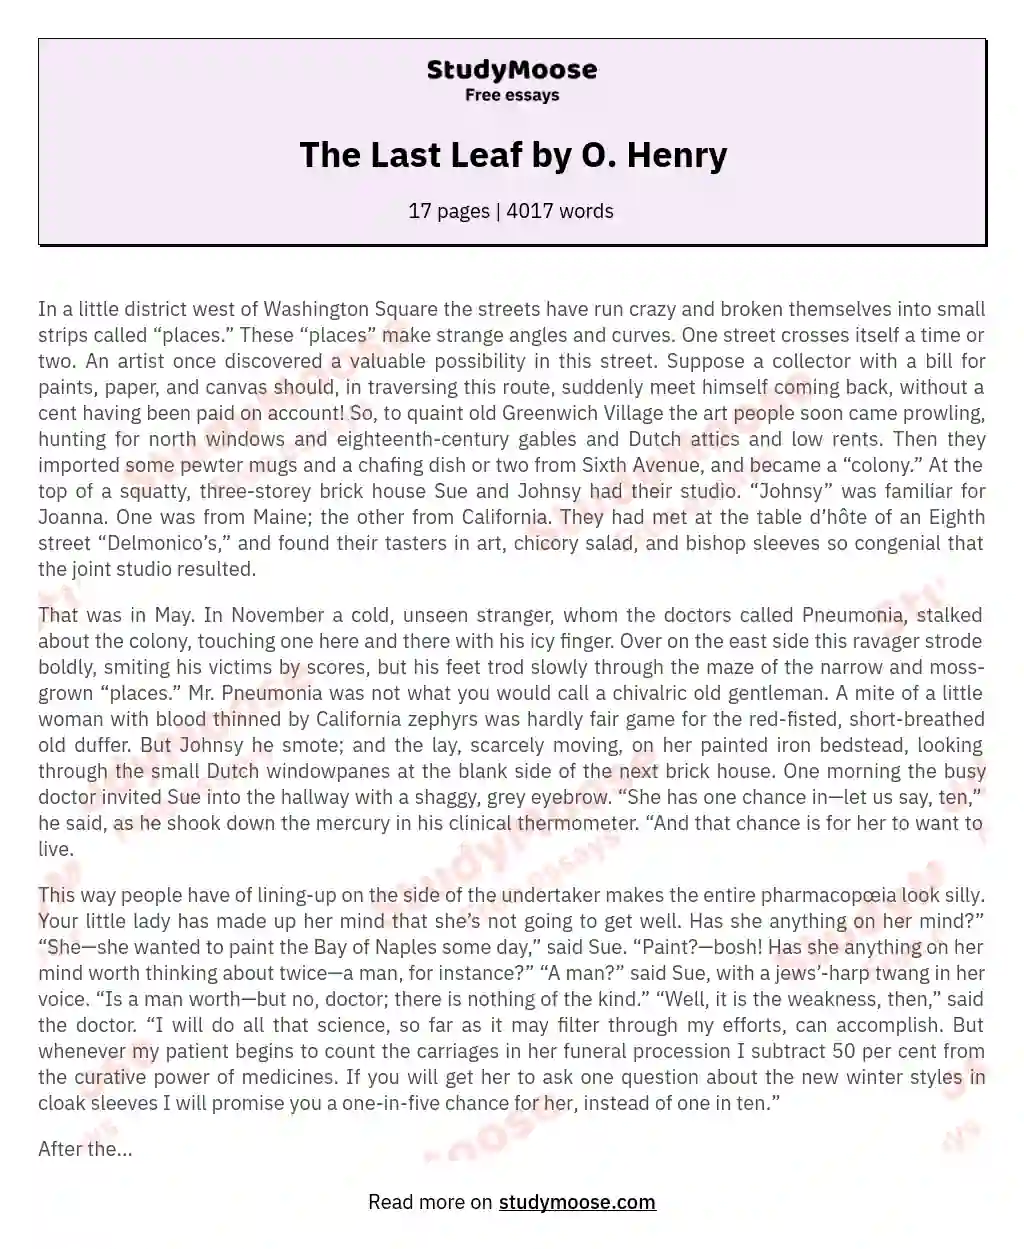 The Last Leaf by O. Henry essay